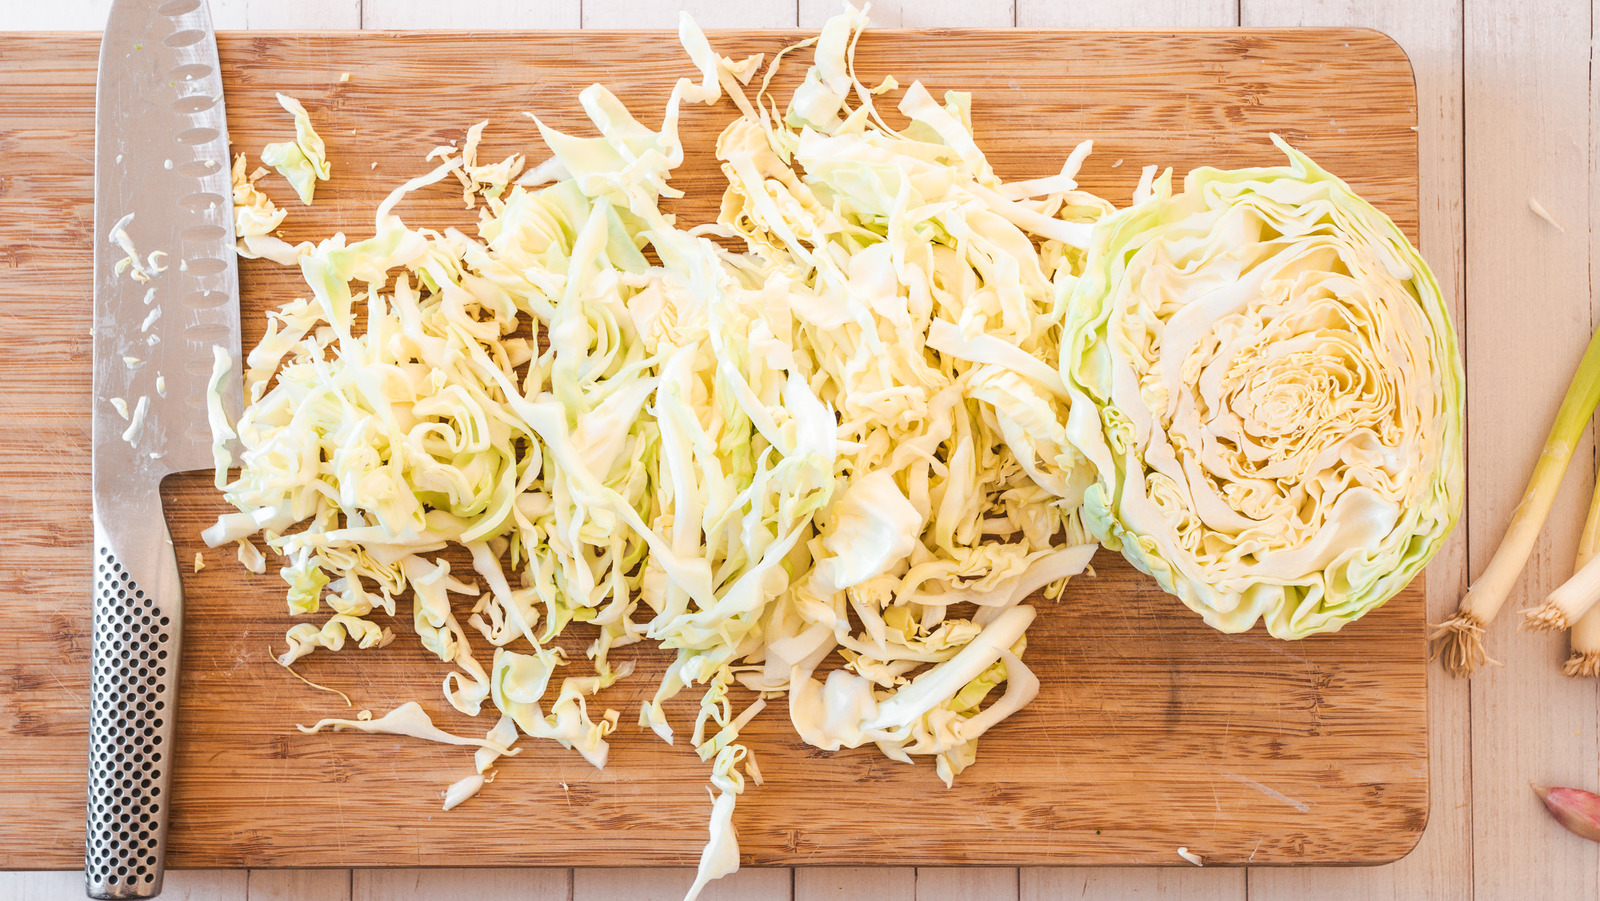 How to Cut Cabbage: The Easiest Methods